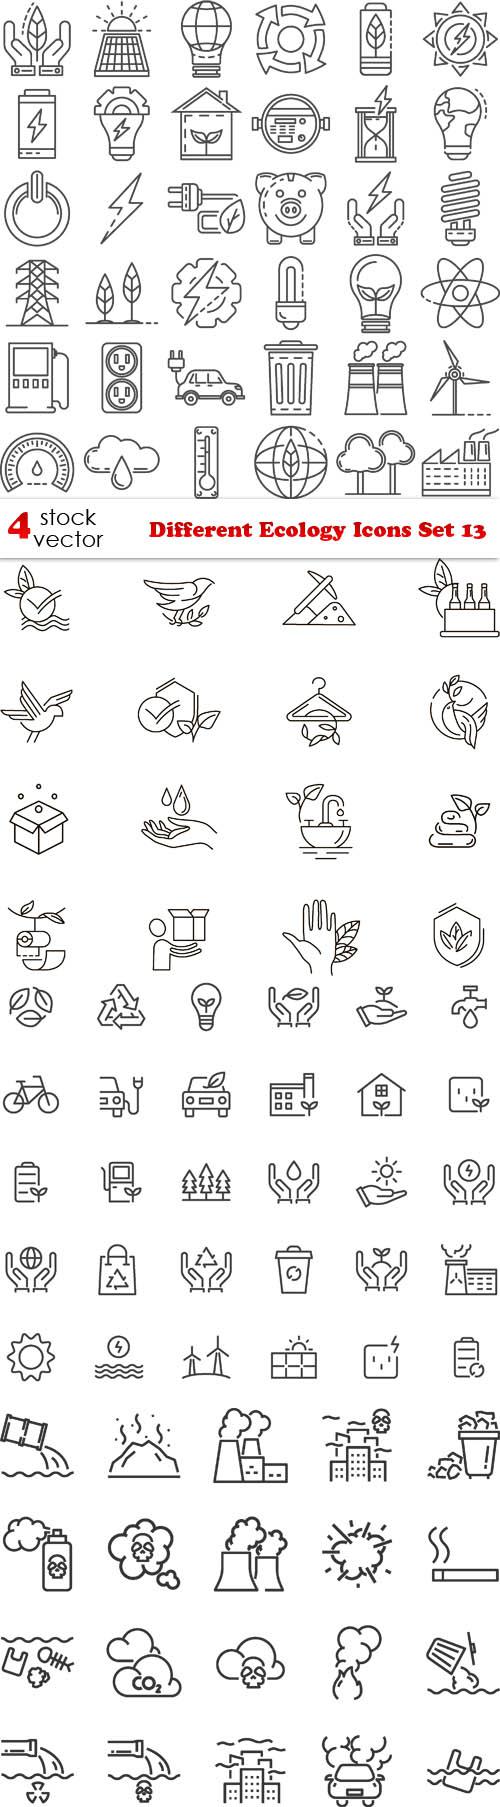 Different Ecology Icons Set 13